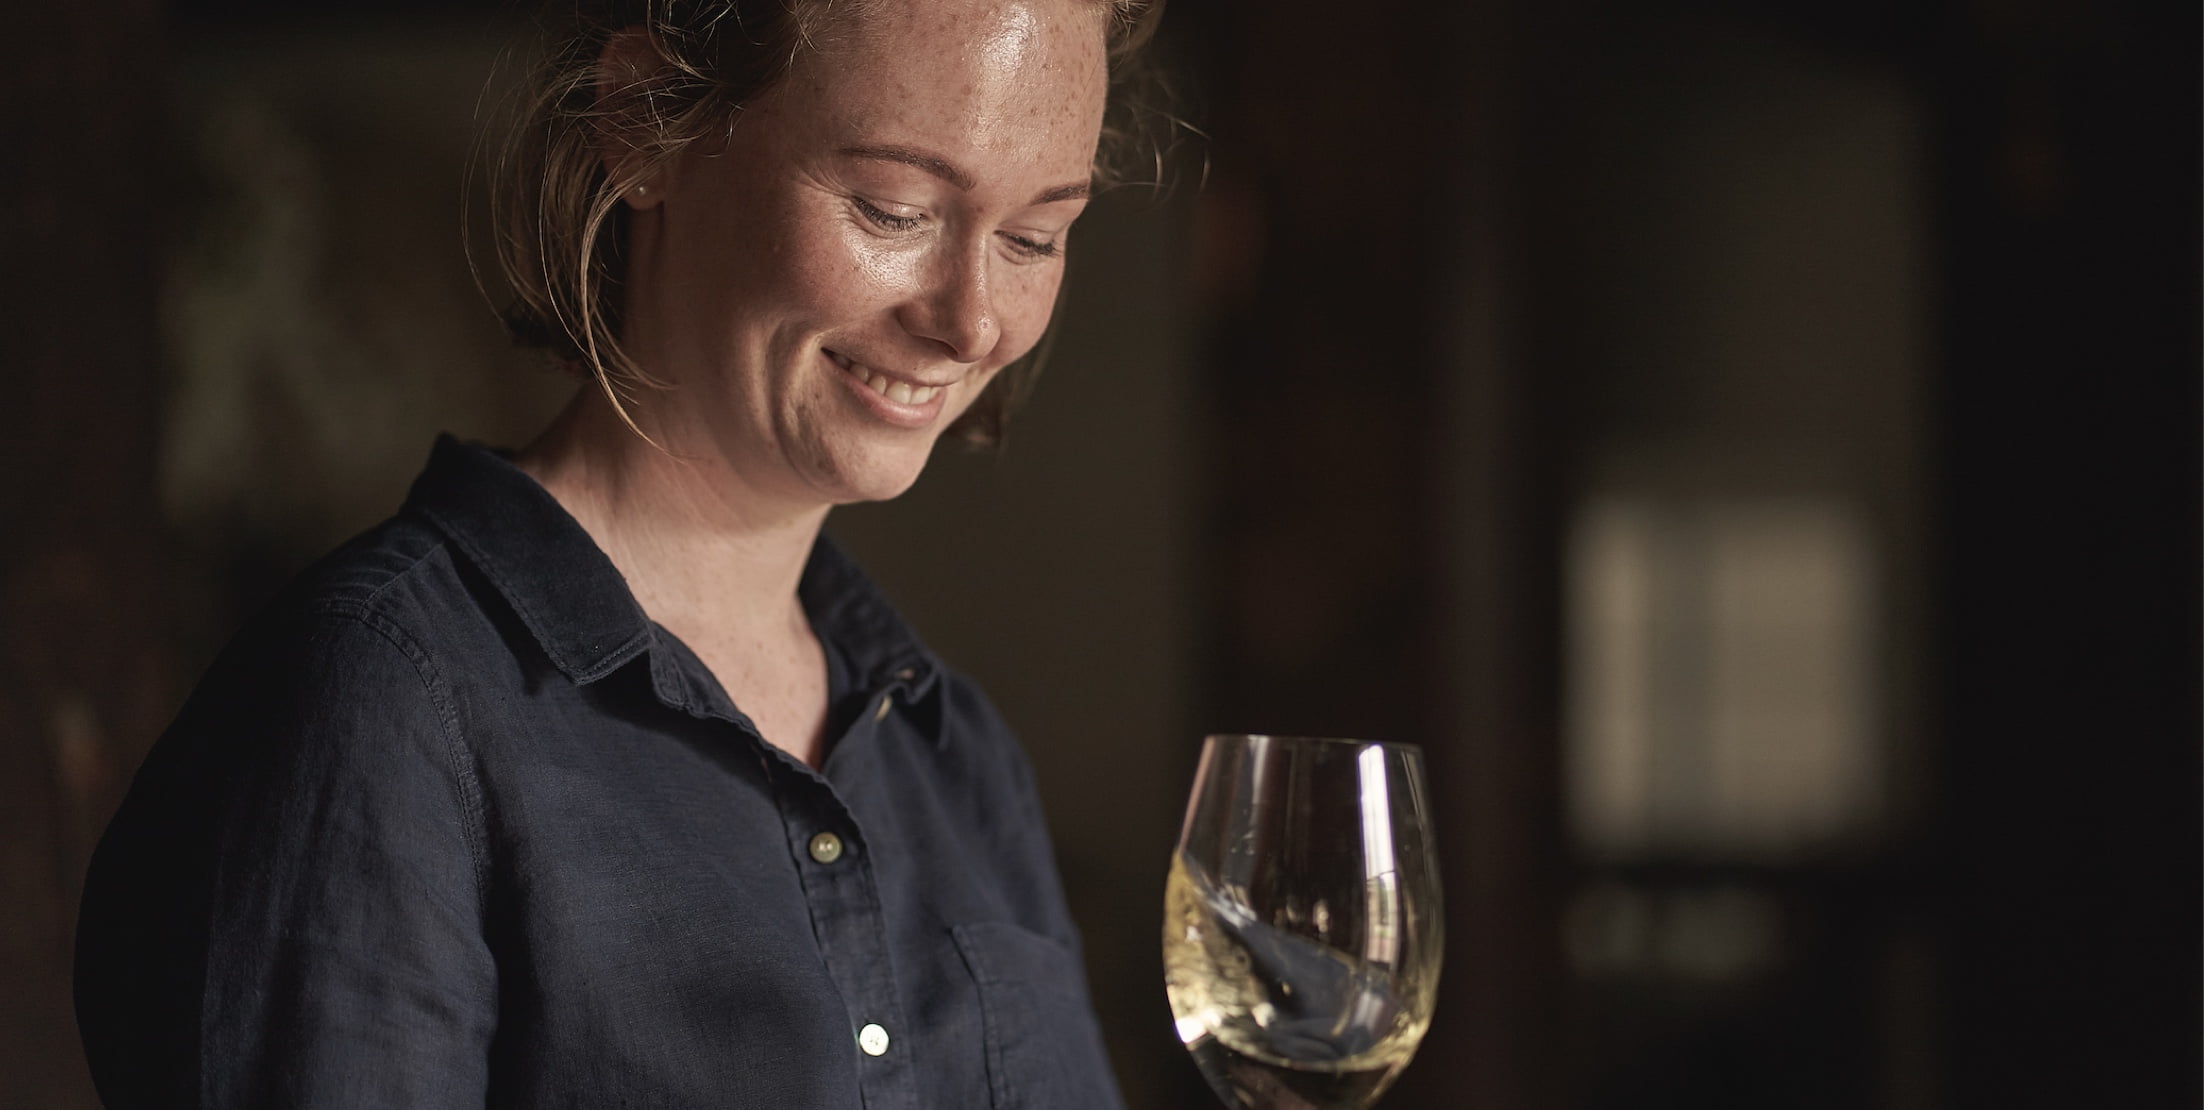 Young woman smiling and looking down at glass of white wine